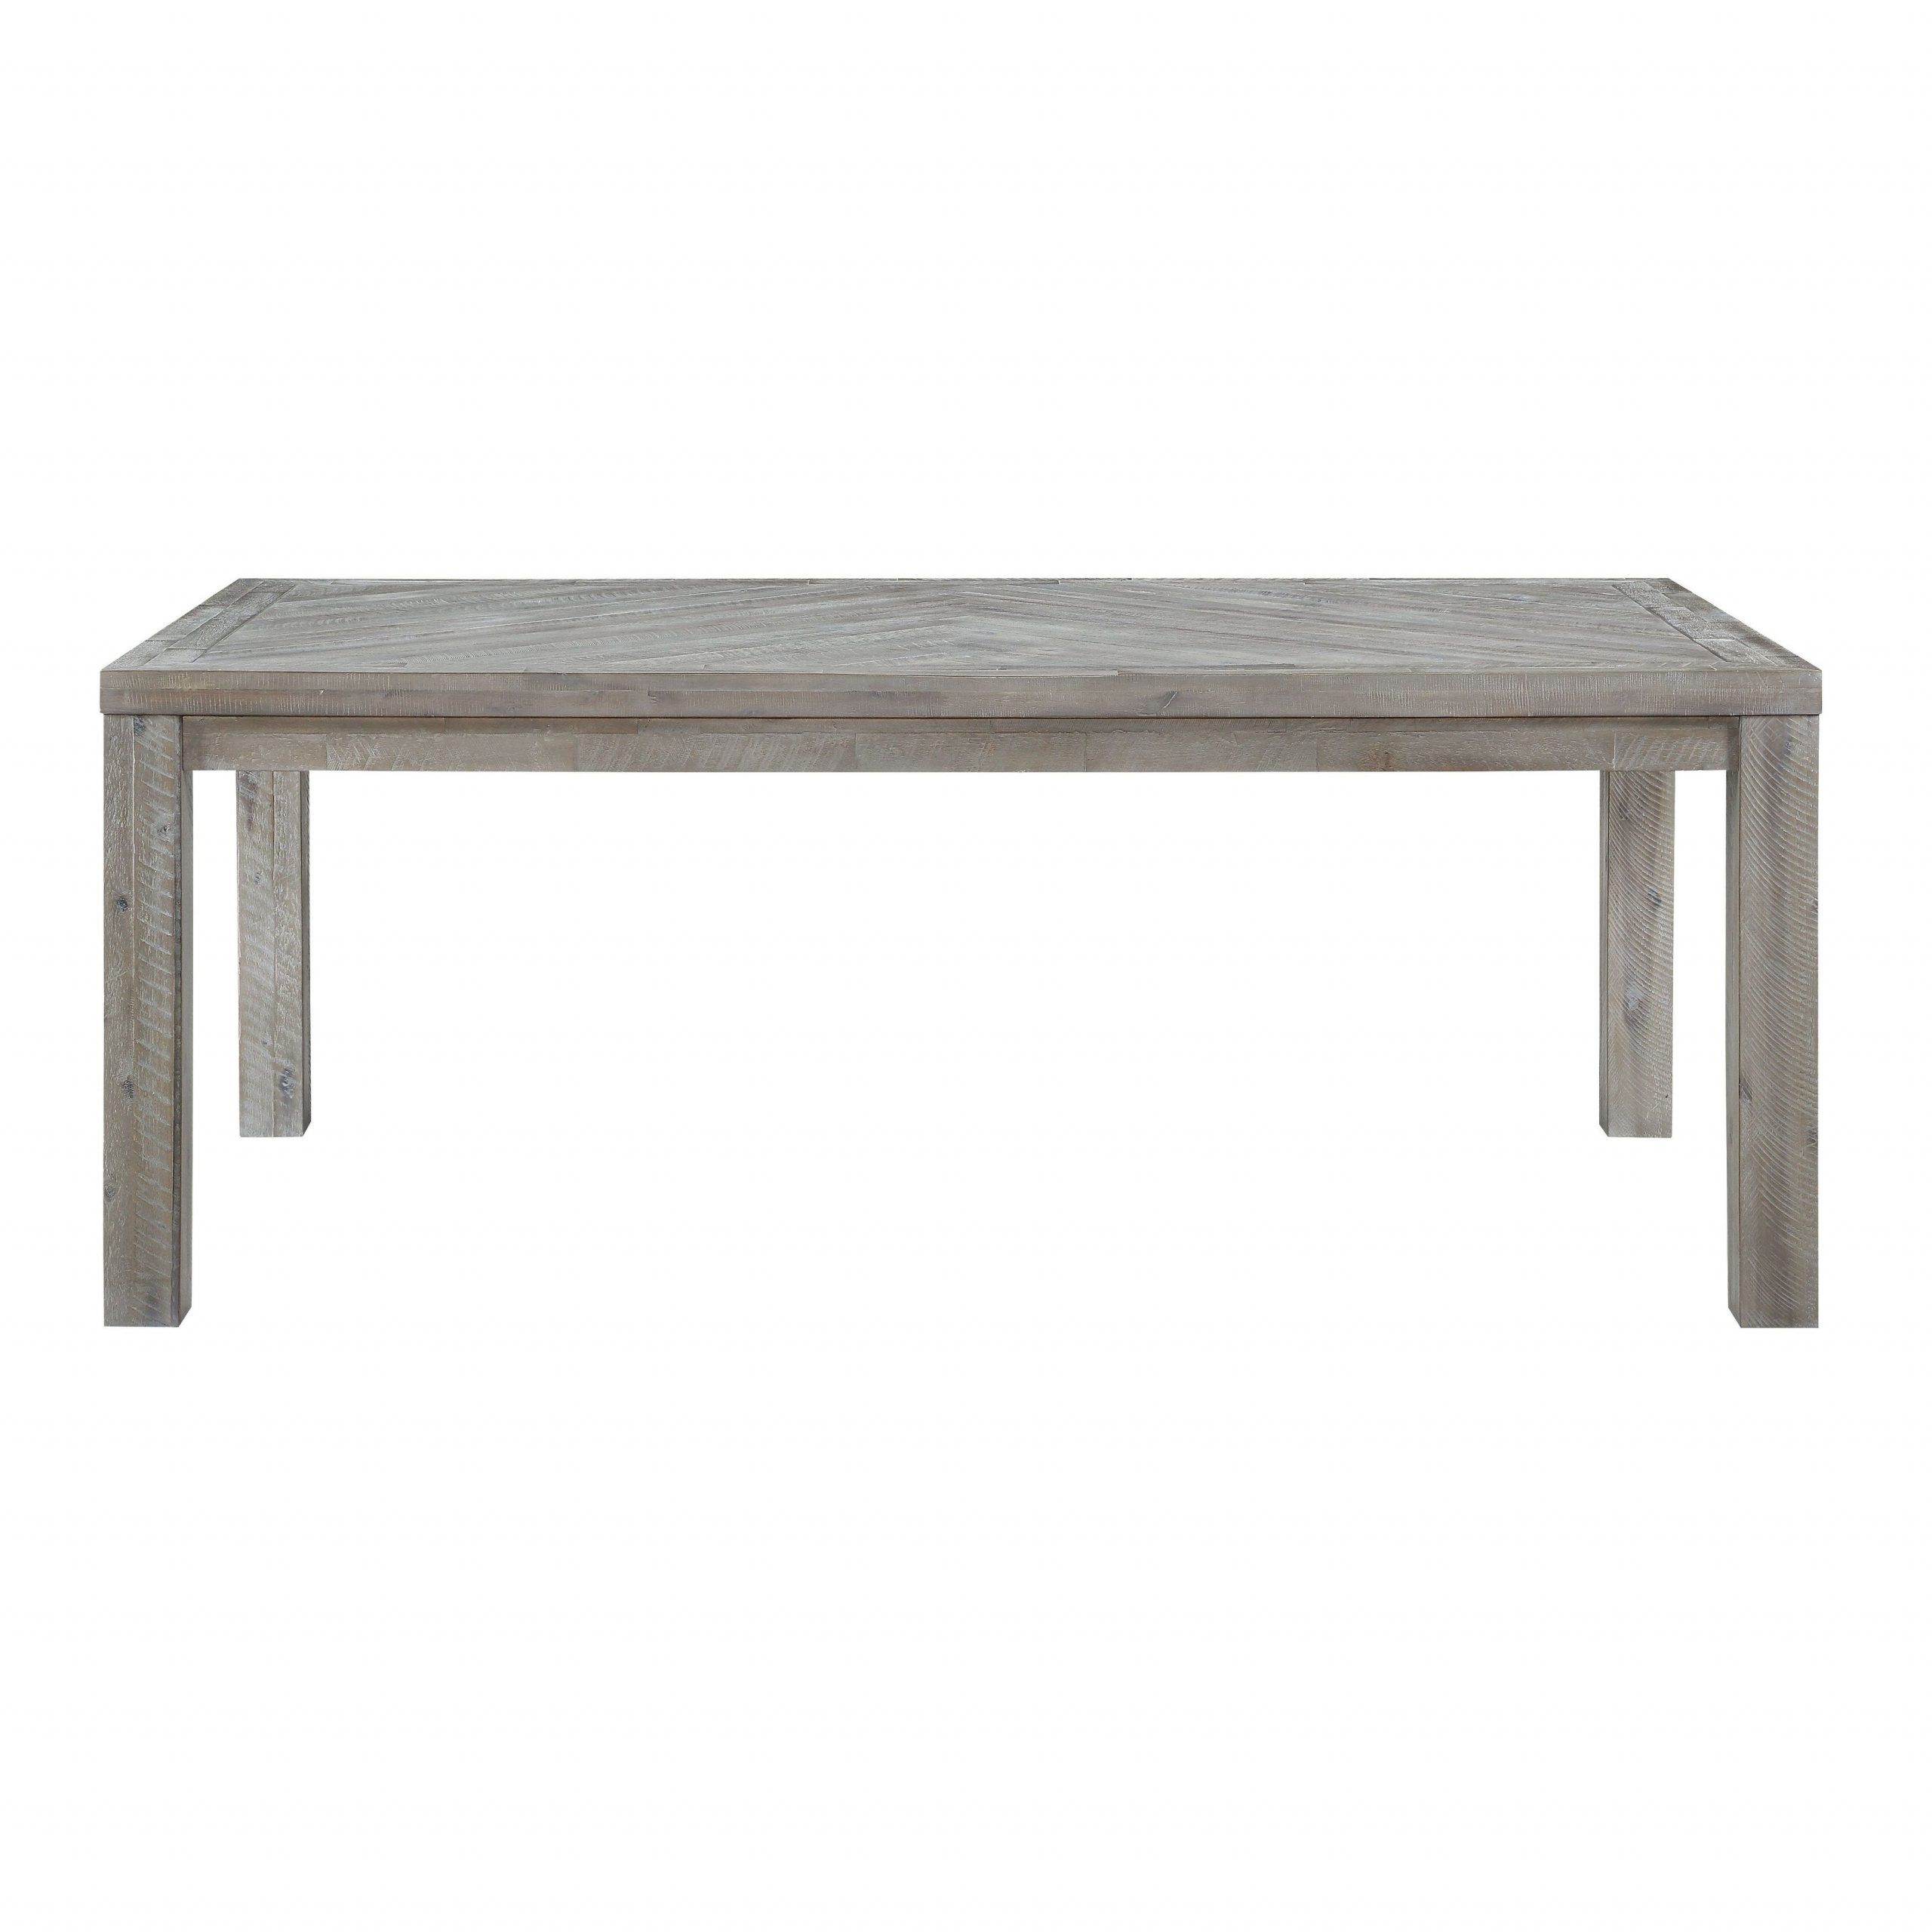 The Gray Barn Daybreak Solid Wood Rectangular Dining Table In Rustic Latte With Regard To Most Recently Released Menlo Reclaimed Wood Extending Dining Tables (View 3 of 25)